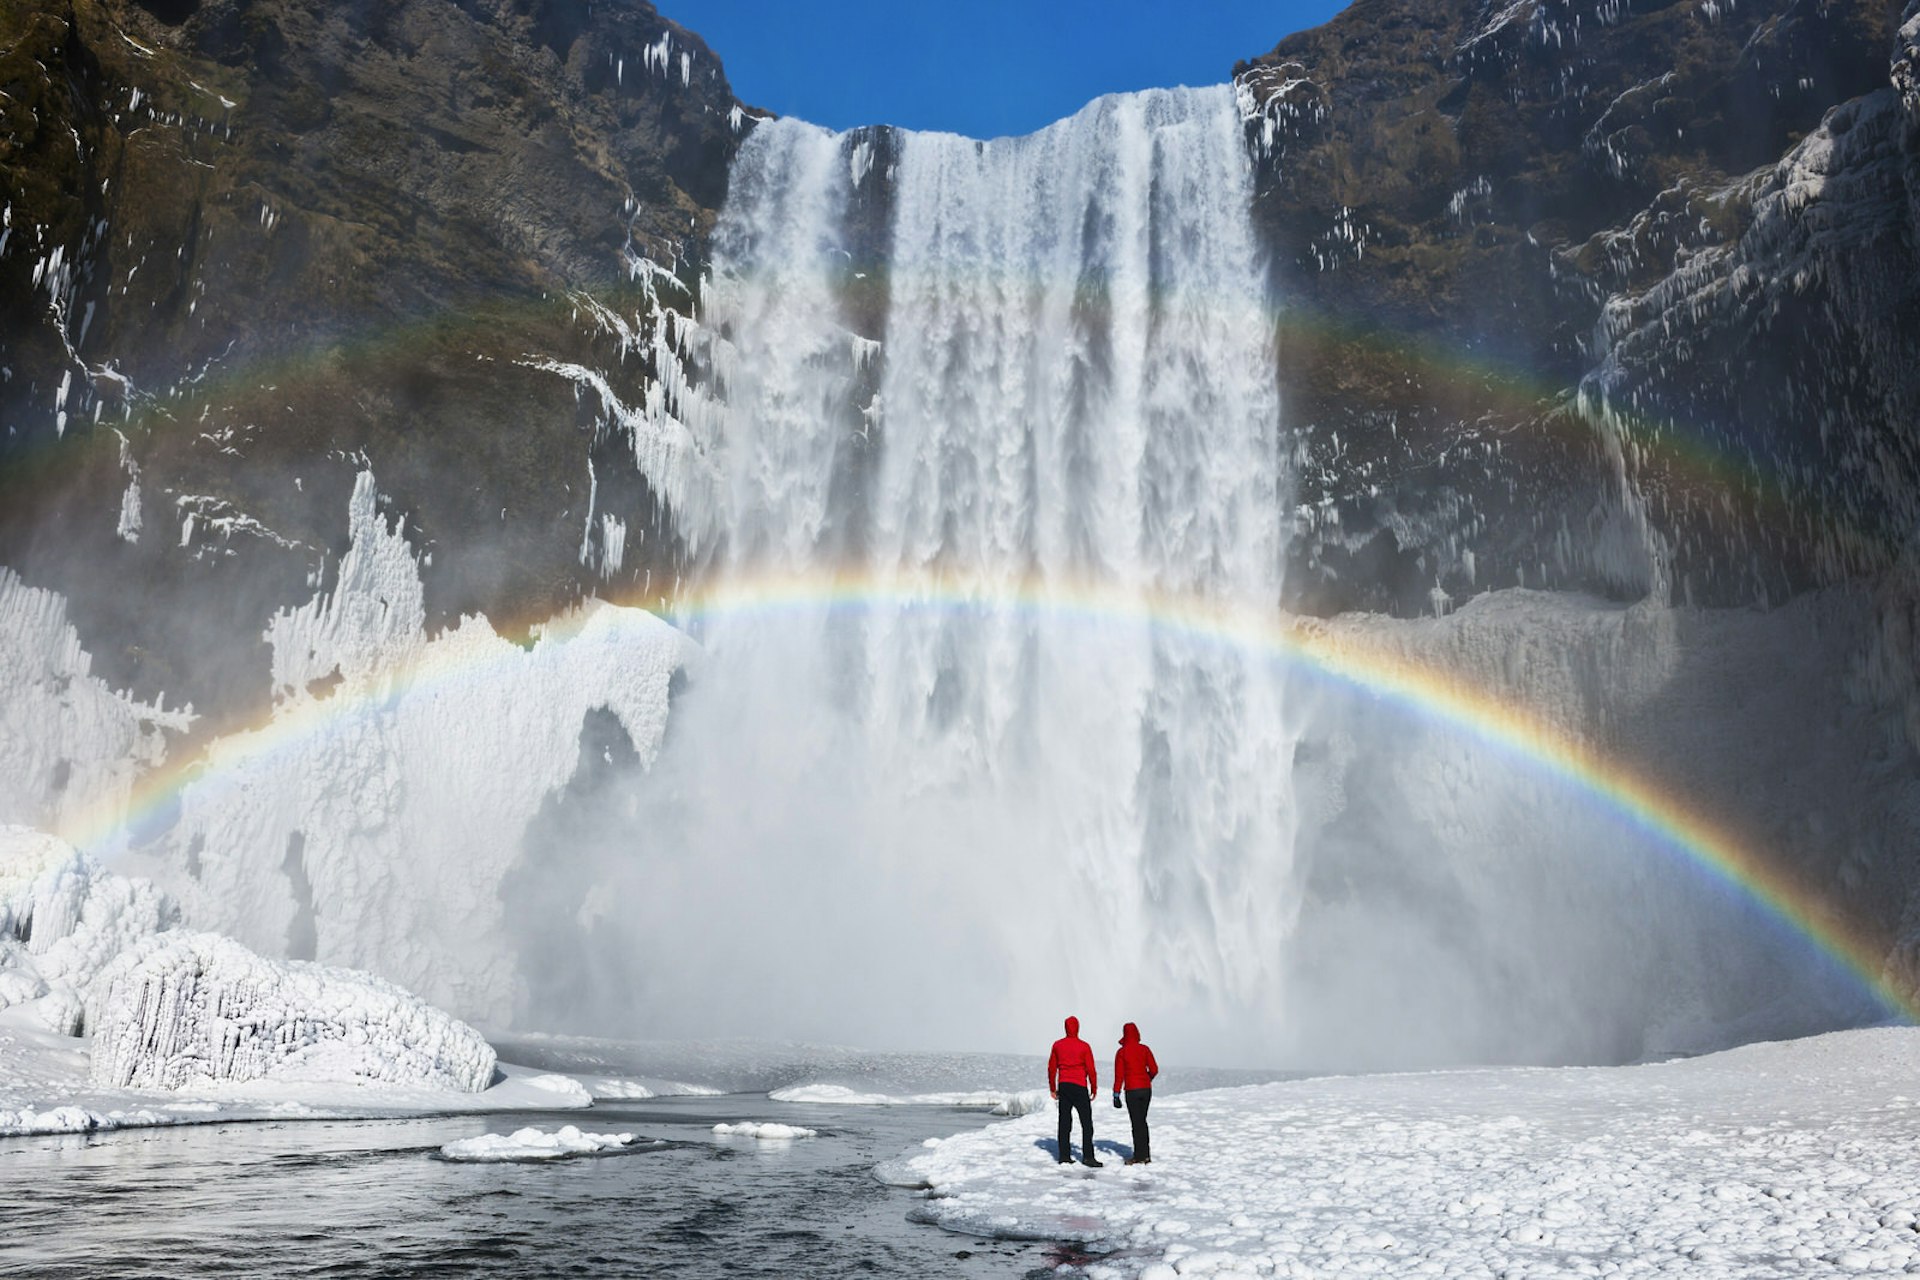 A couple stand under a rainbow that spans a huge waterfall amid snowy scenery